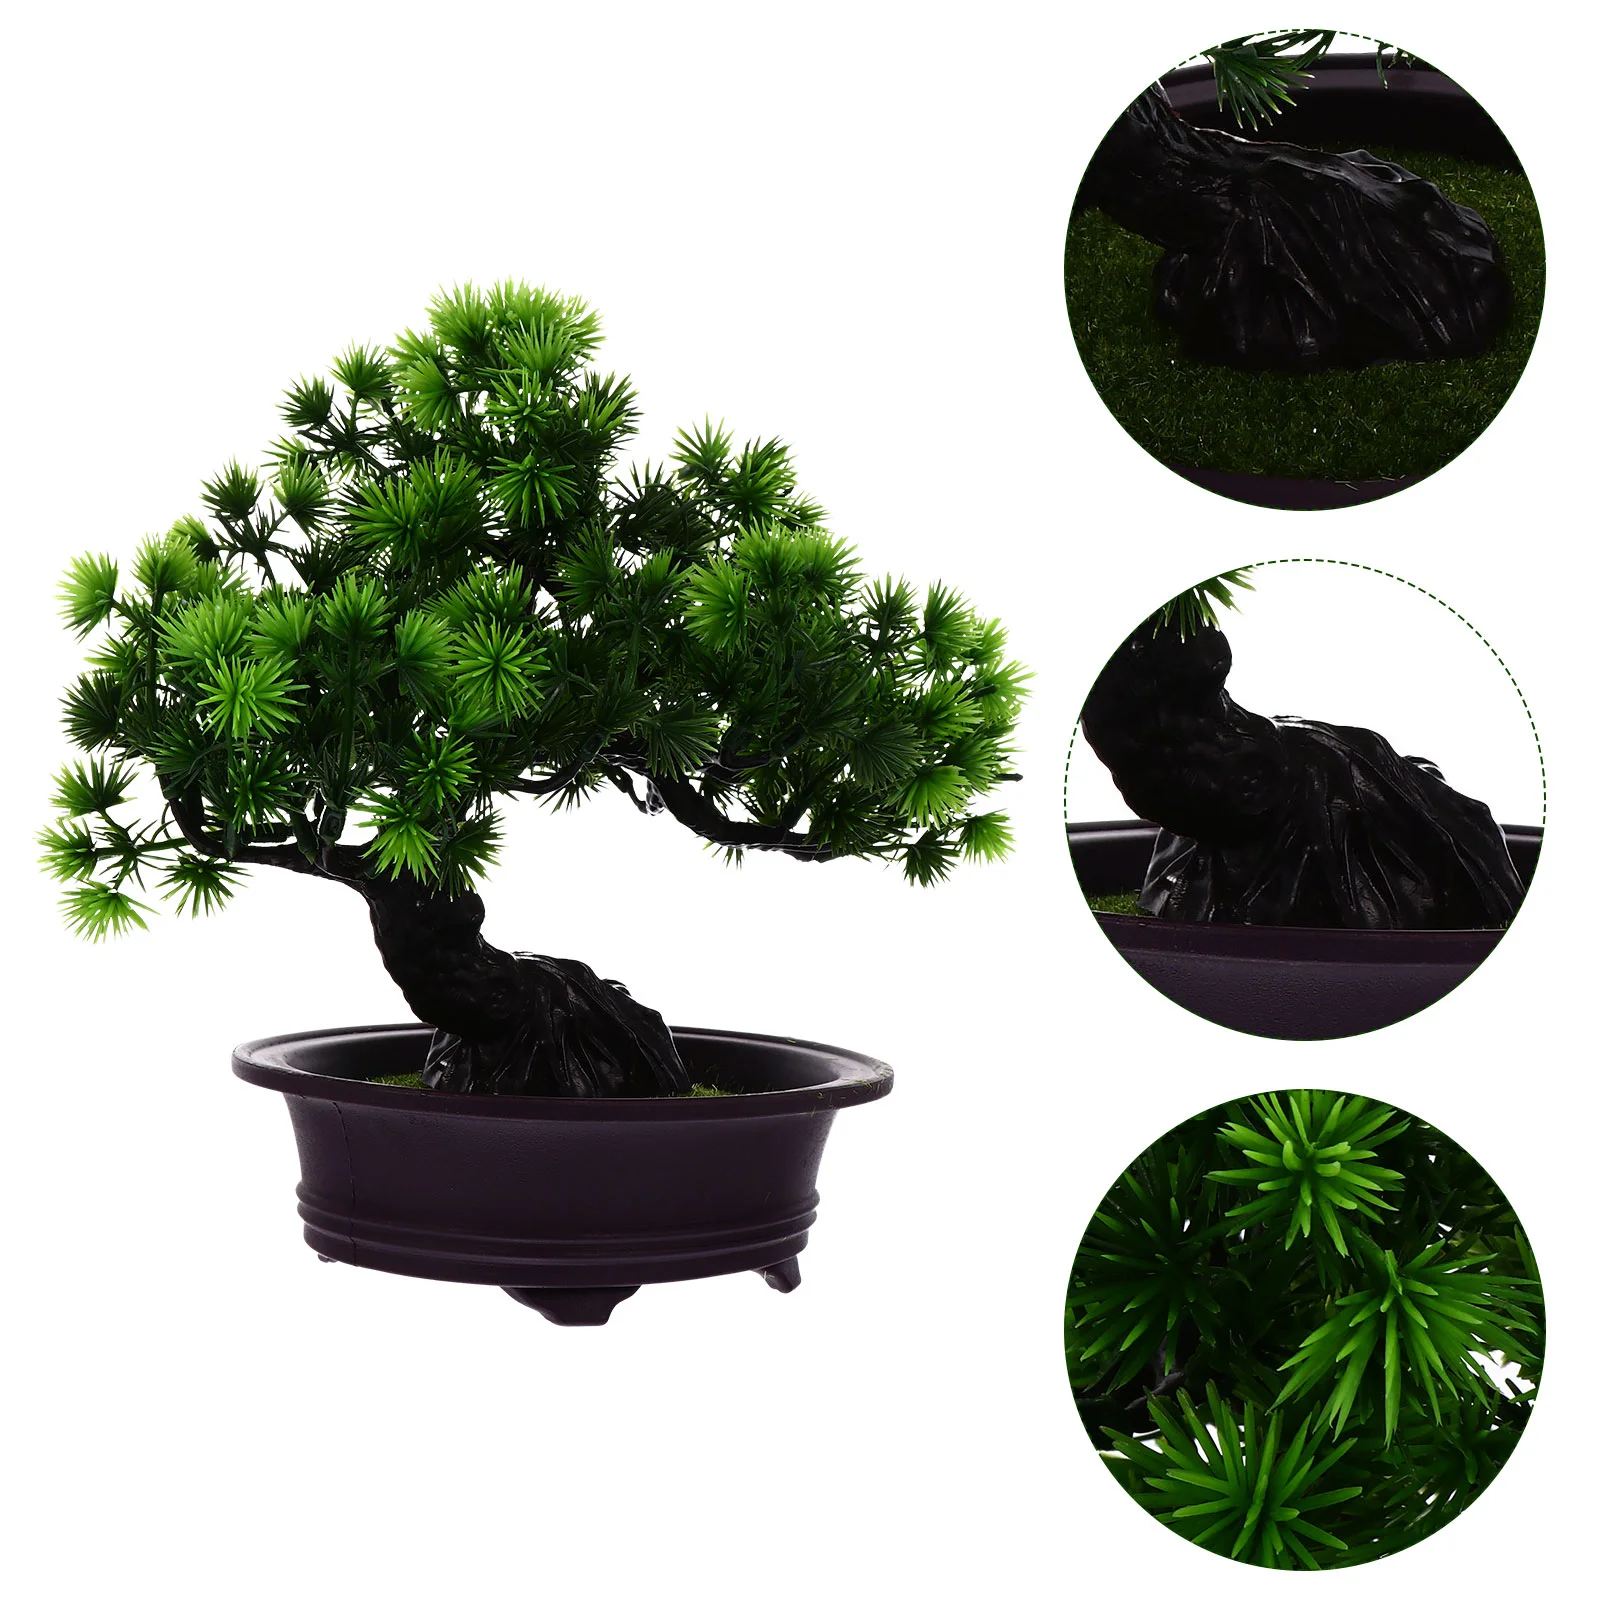 

Welcoming Pine Ornaments Simulated Bonsai Flower Decor Fake Faux Welcome Simulation Plastic Decors Office Greenery